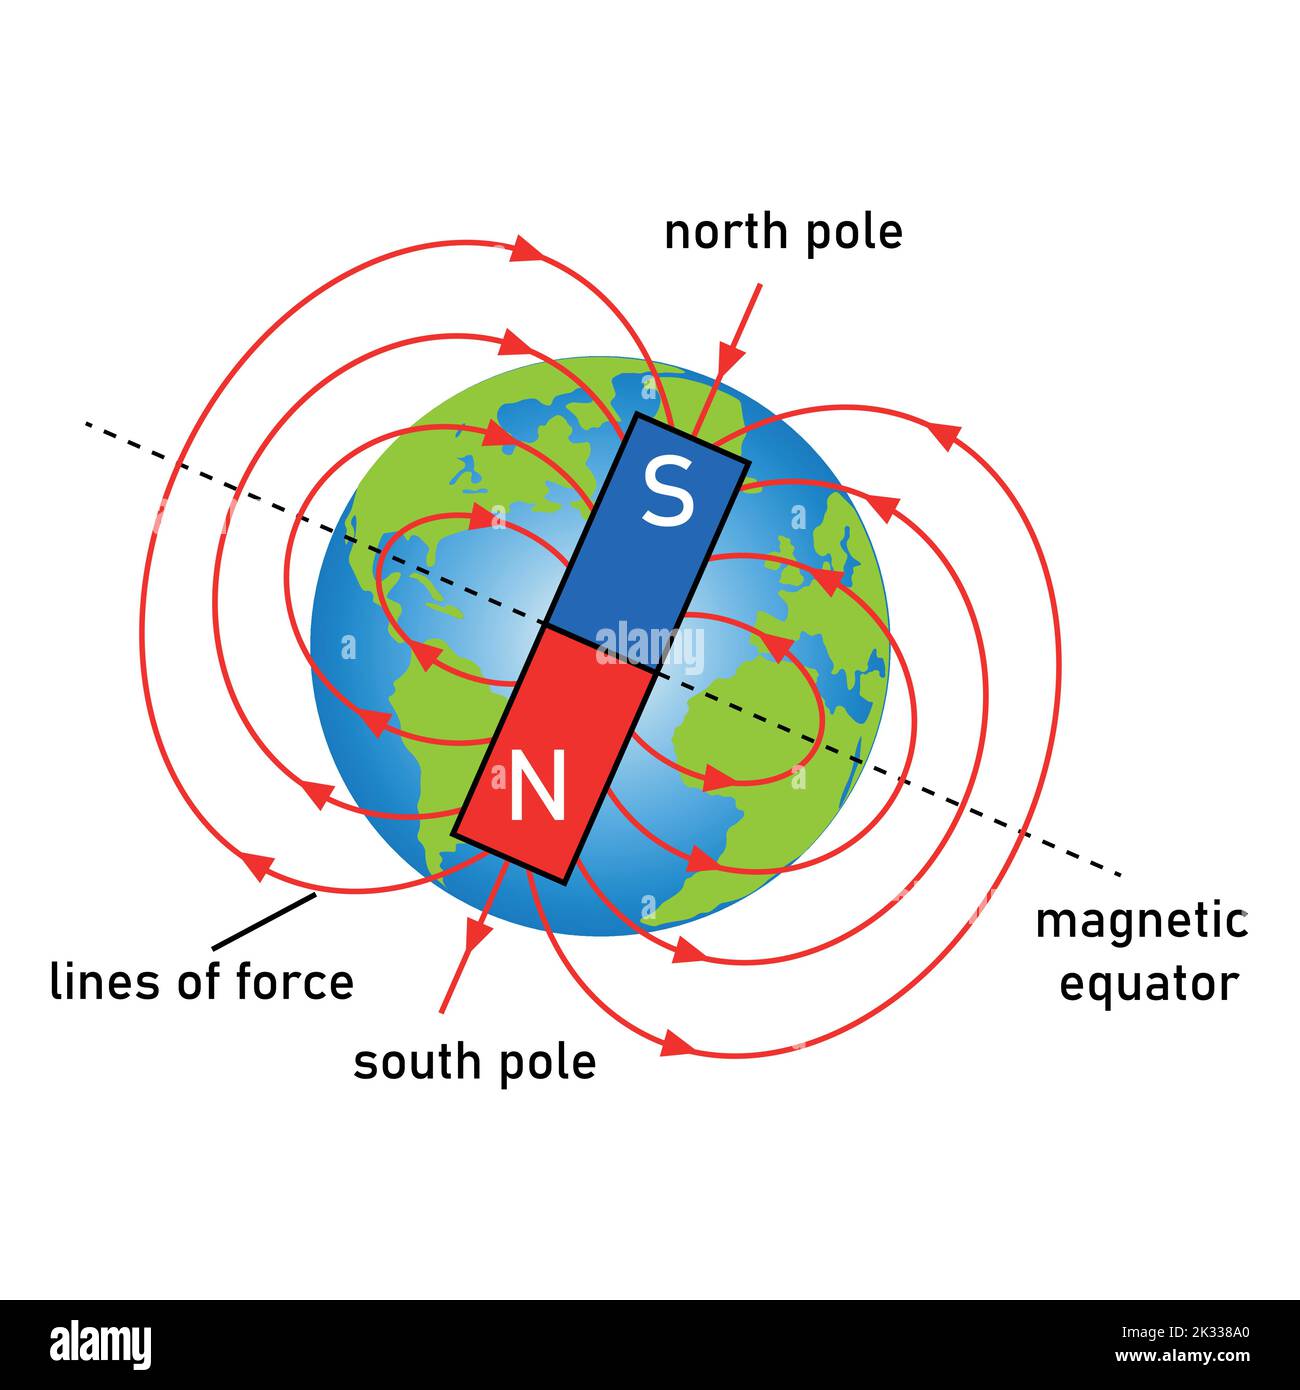 Diagram of magnetic field of earth showing the north pole and south pole. Stock Vector